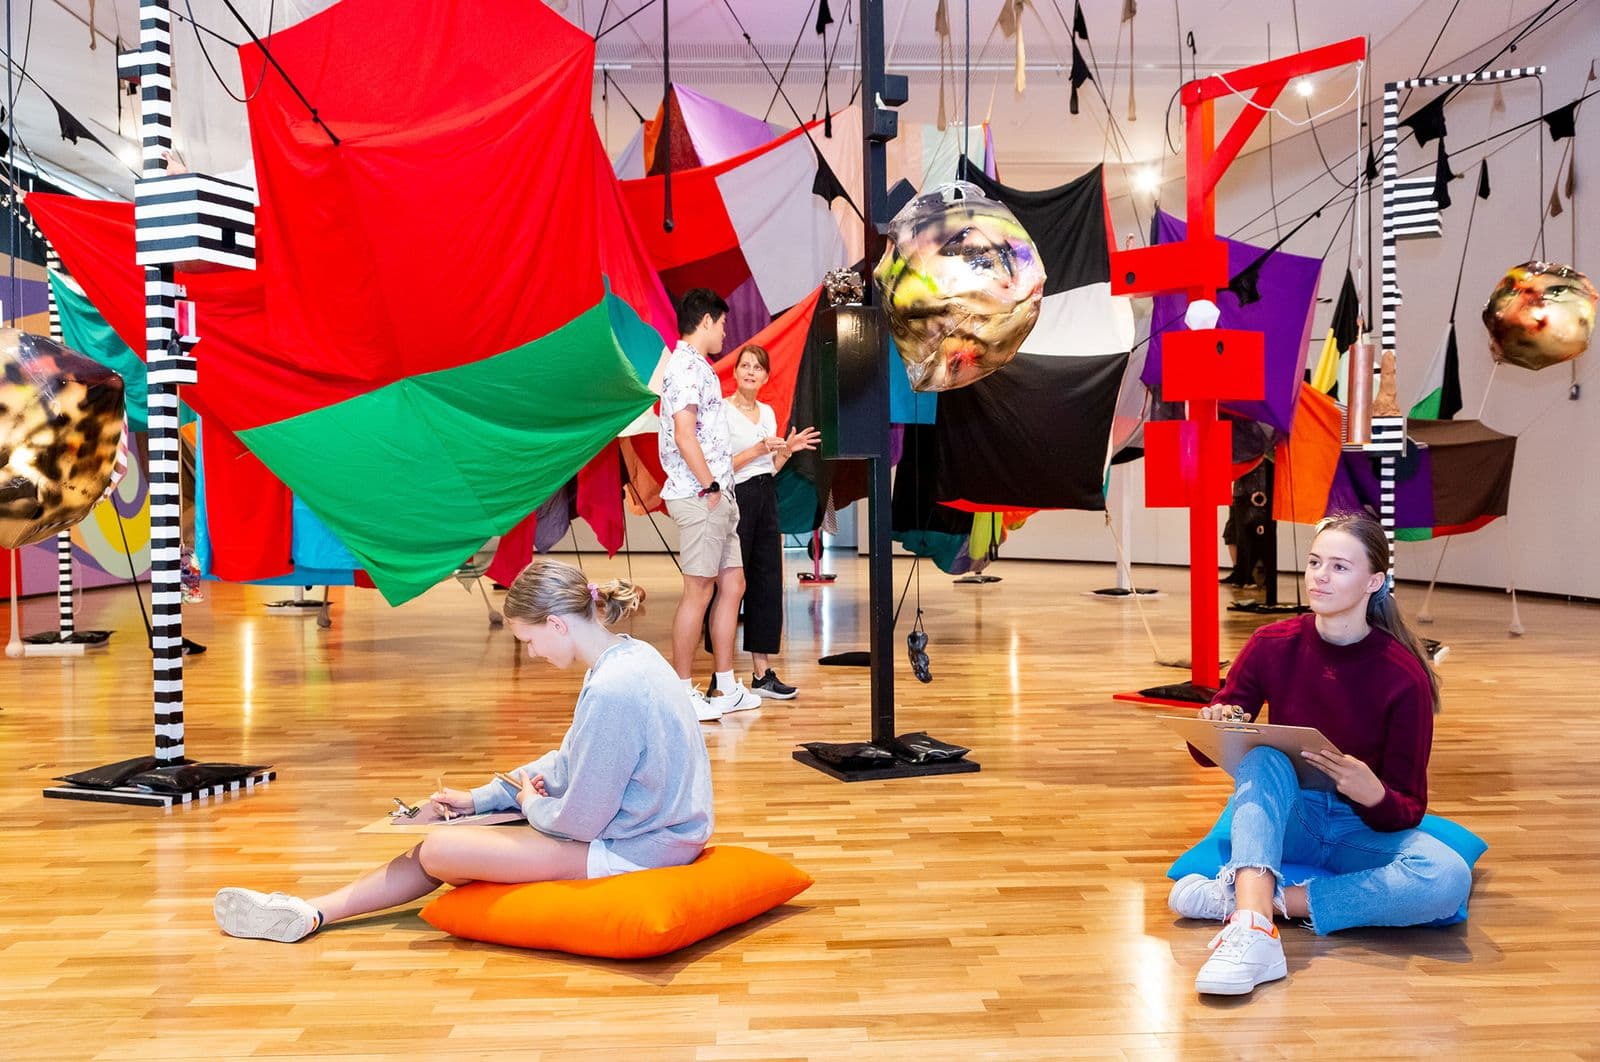 Two people sit and draw while two others stand within a large full-room installation made of brightly coloured fabric and poles